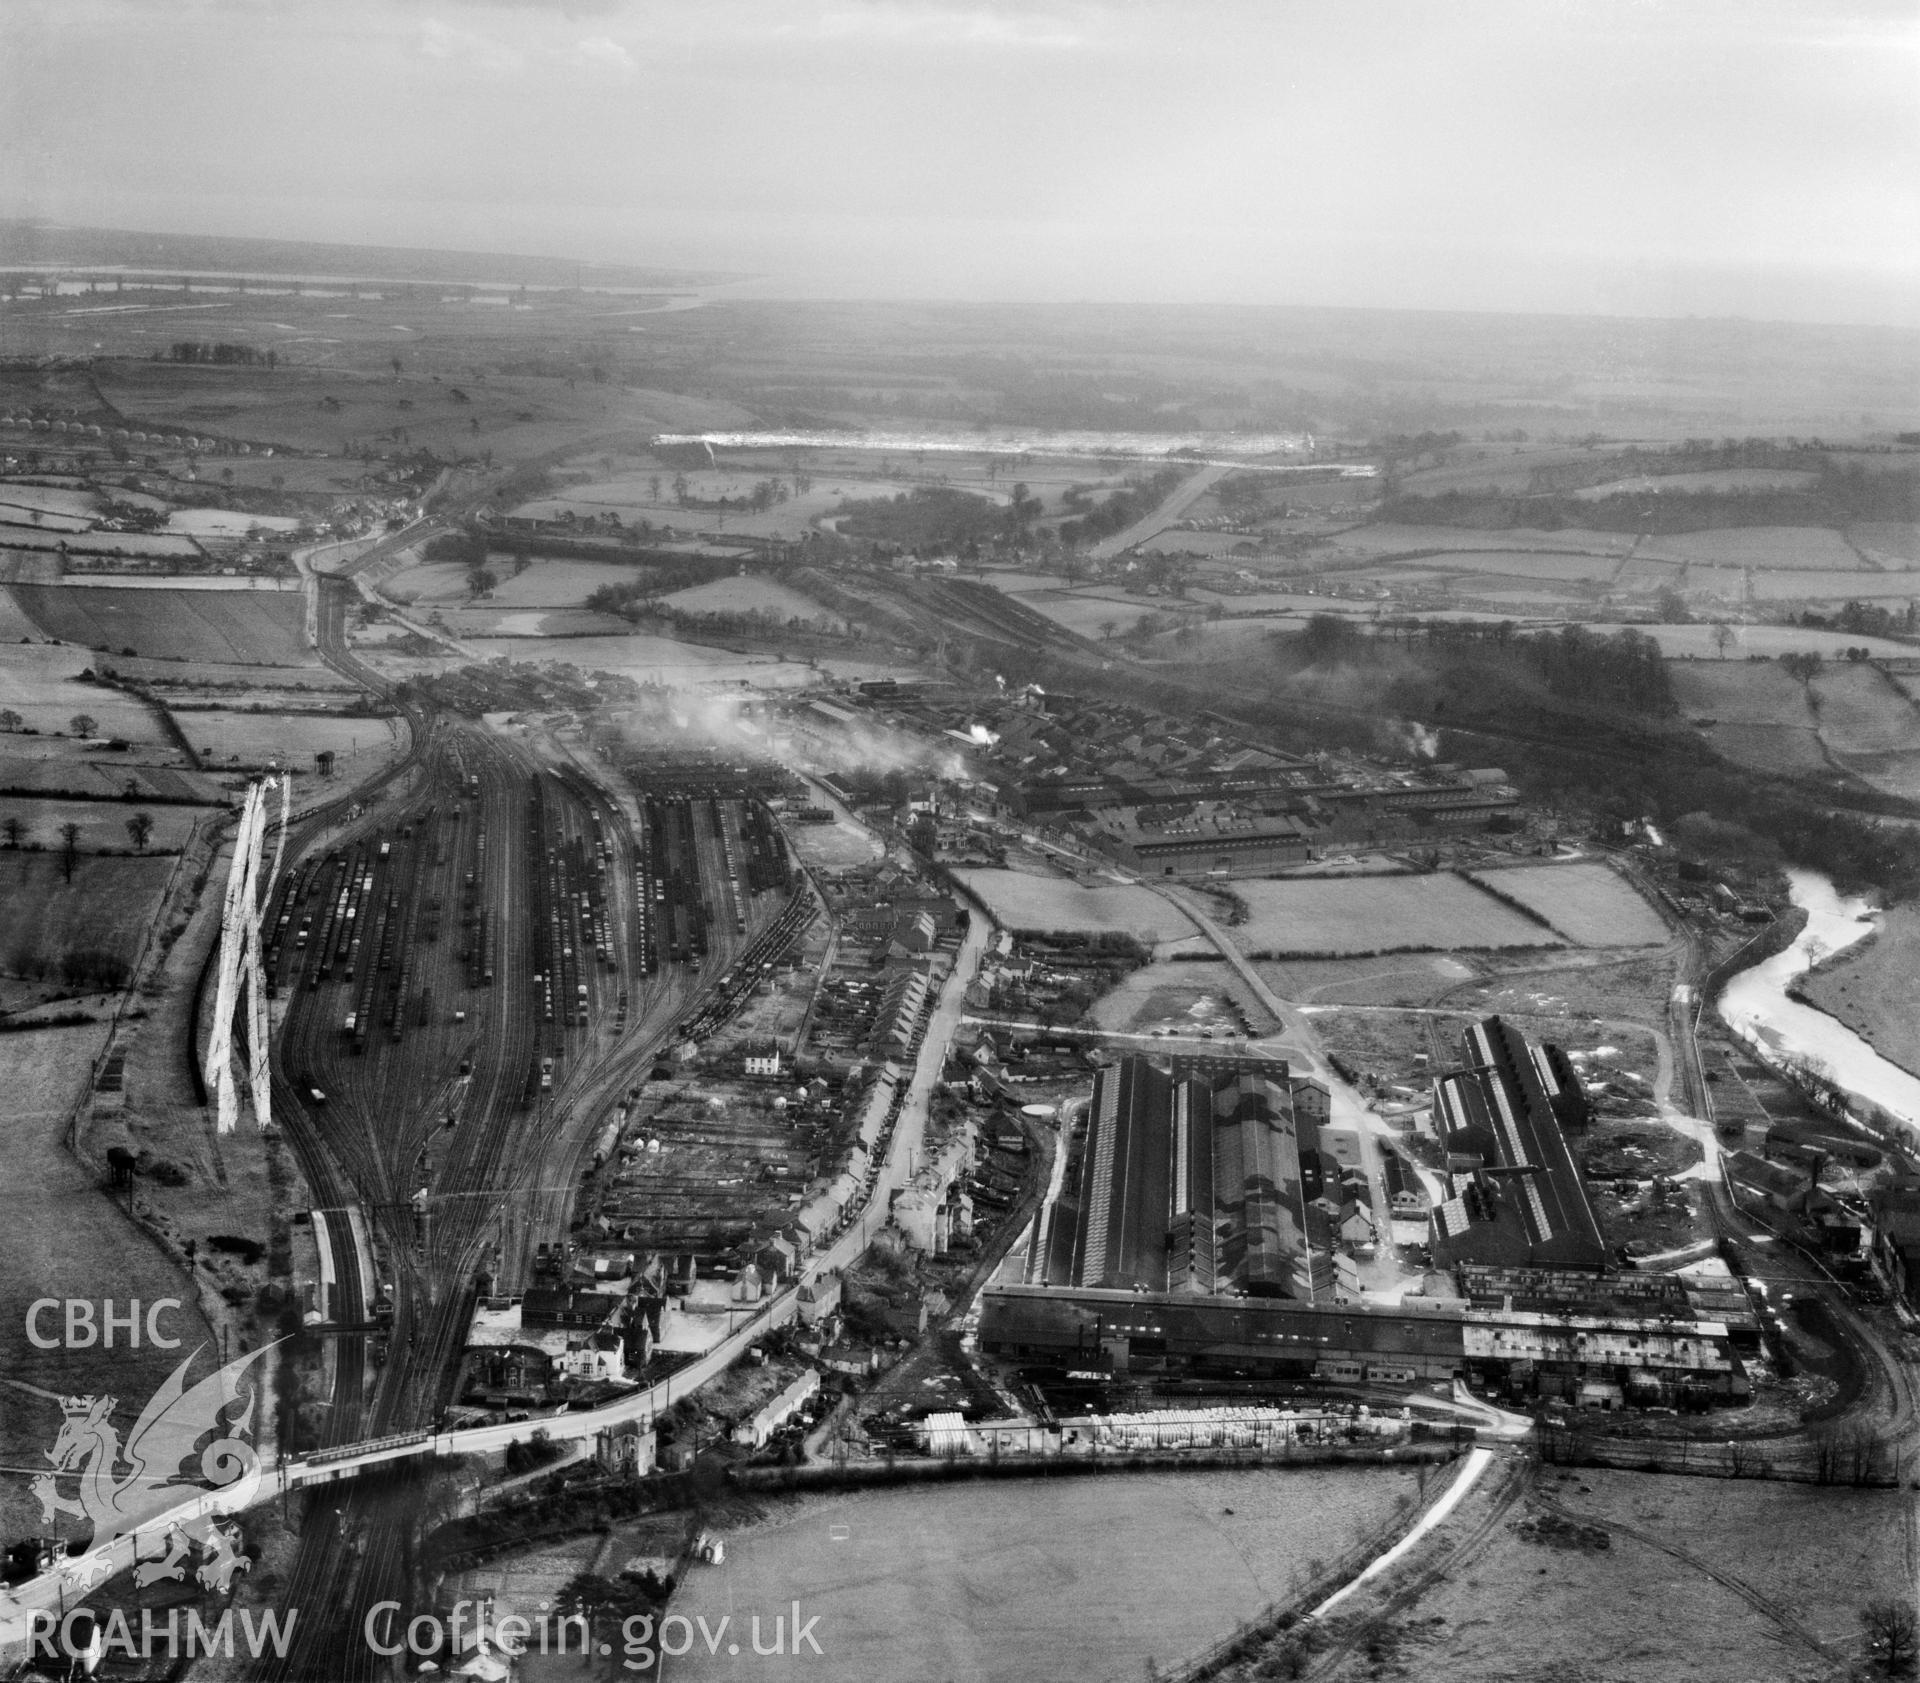 View of Northern Aluminium Company works, Rogerstone, showing camoflaged roofs